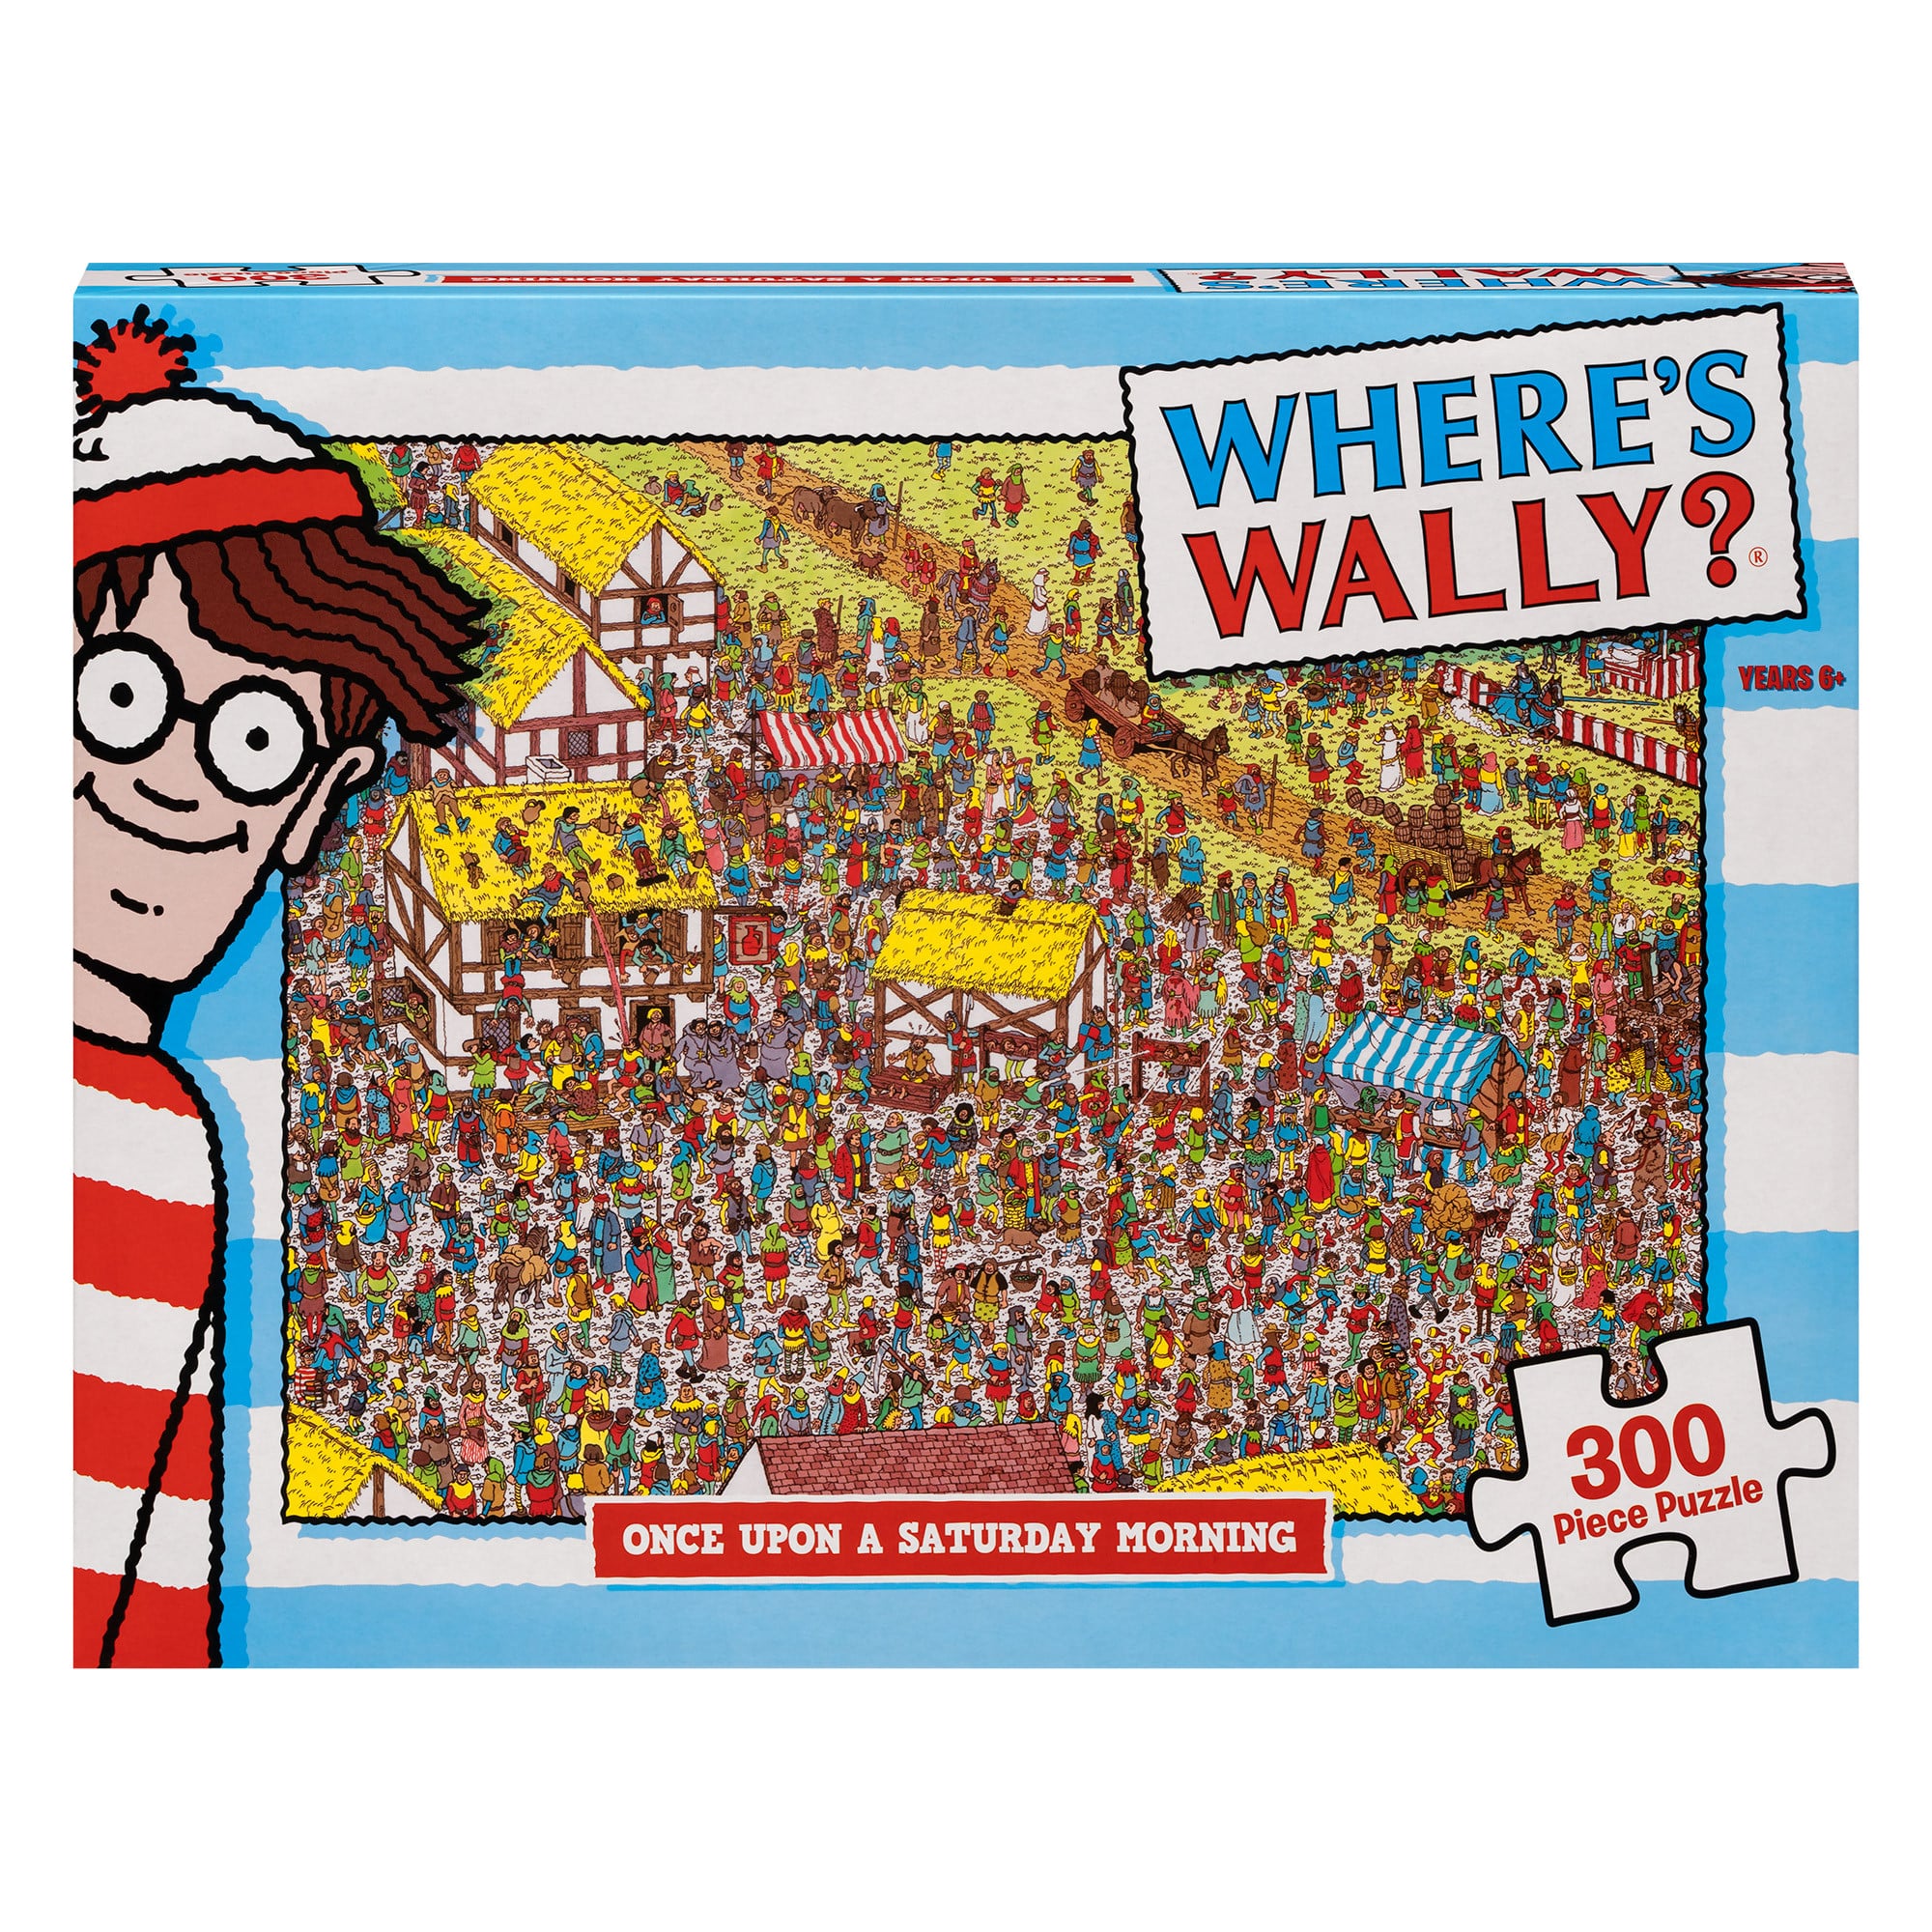 Where's Wally? - 300 Piece Jigsaw Puzzle Assortment